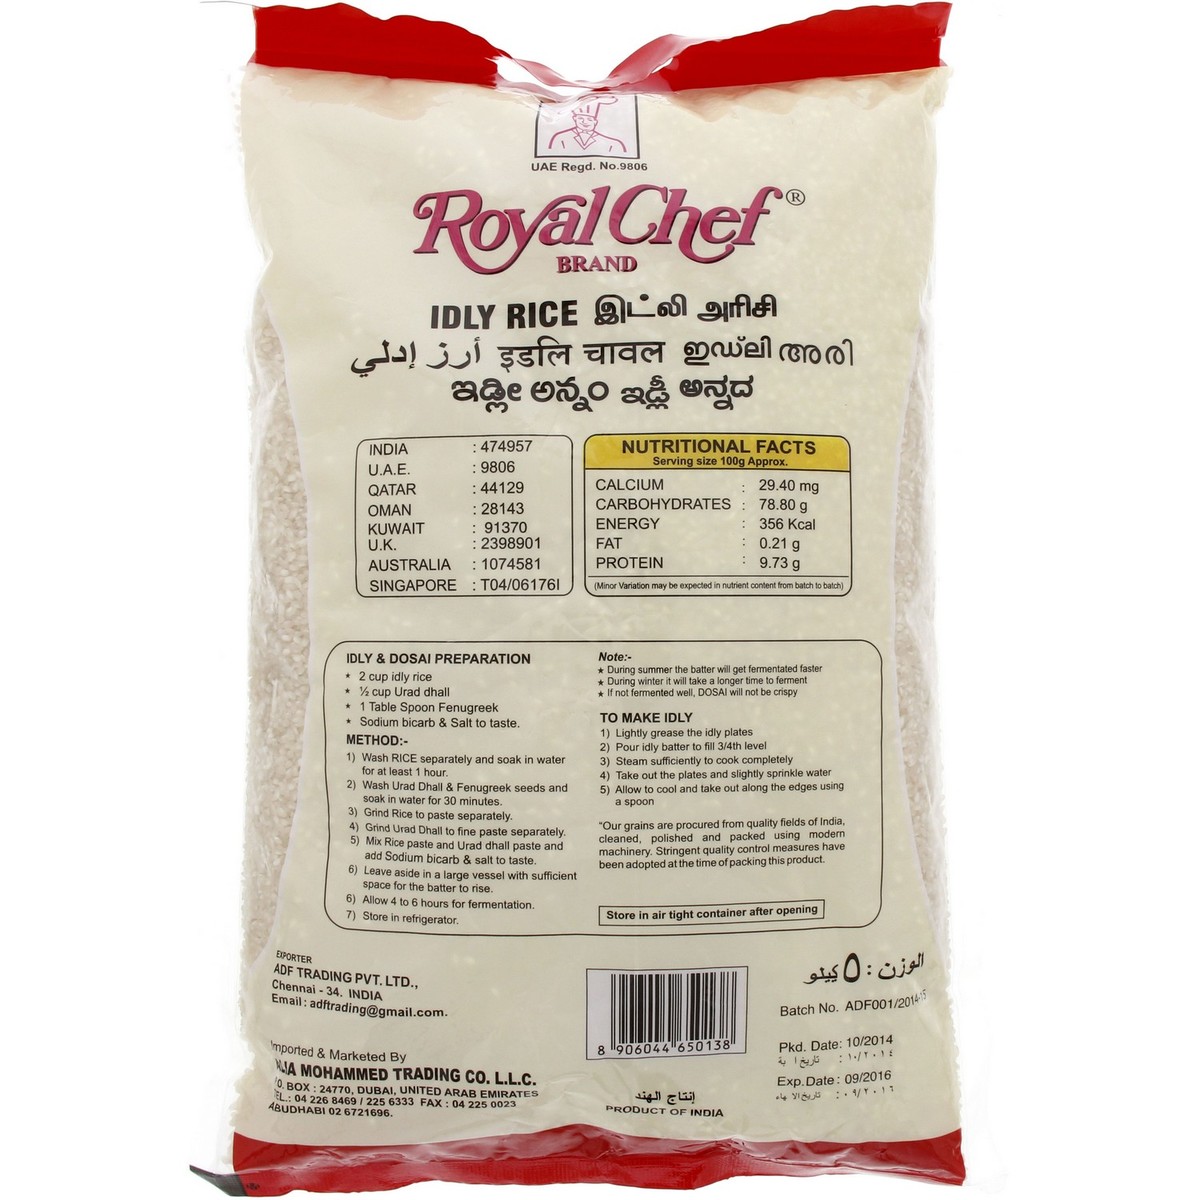 Royal Chef Idly Rice 5 kg